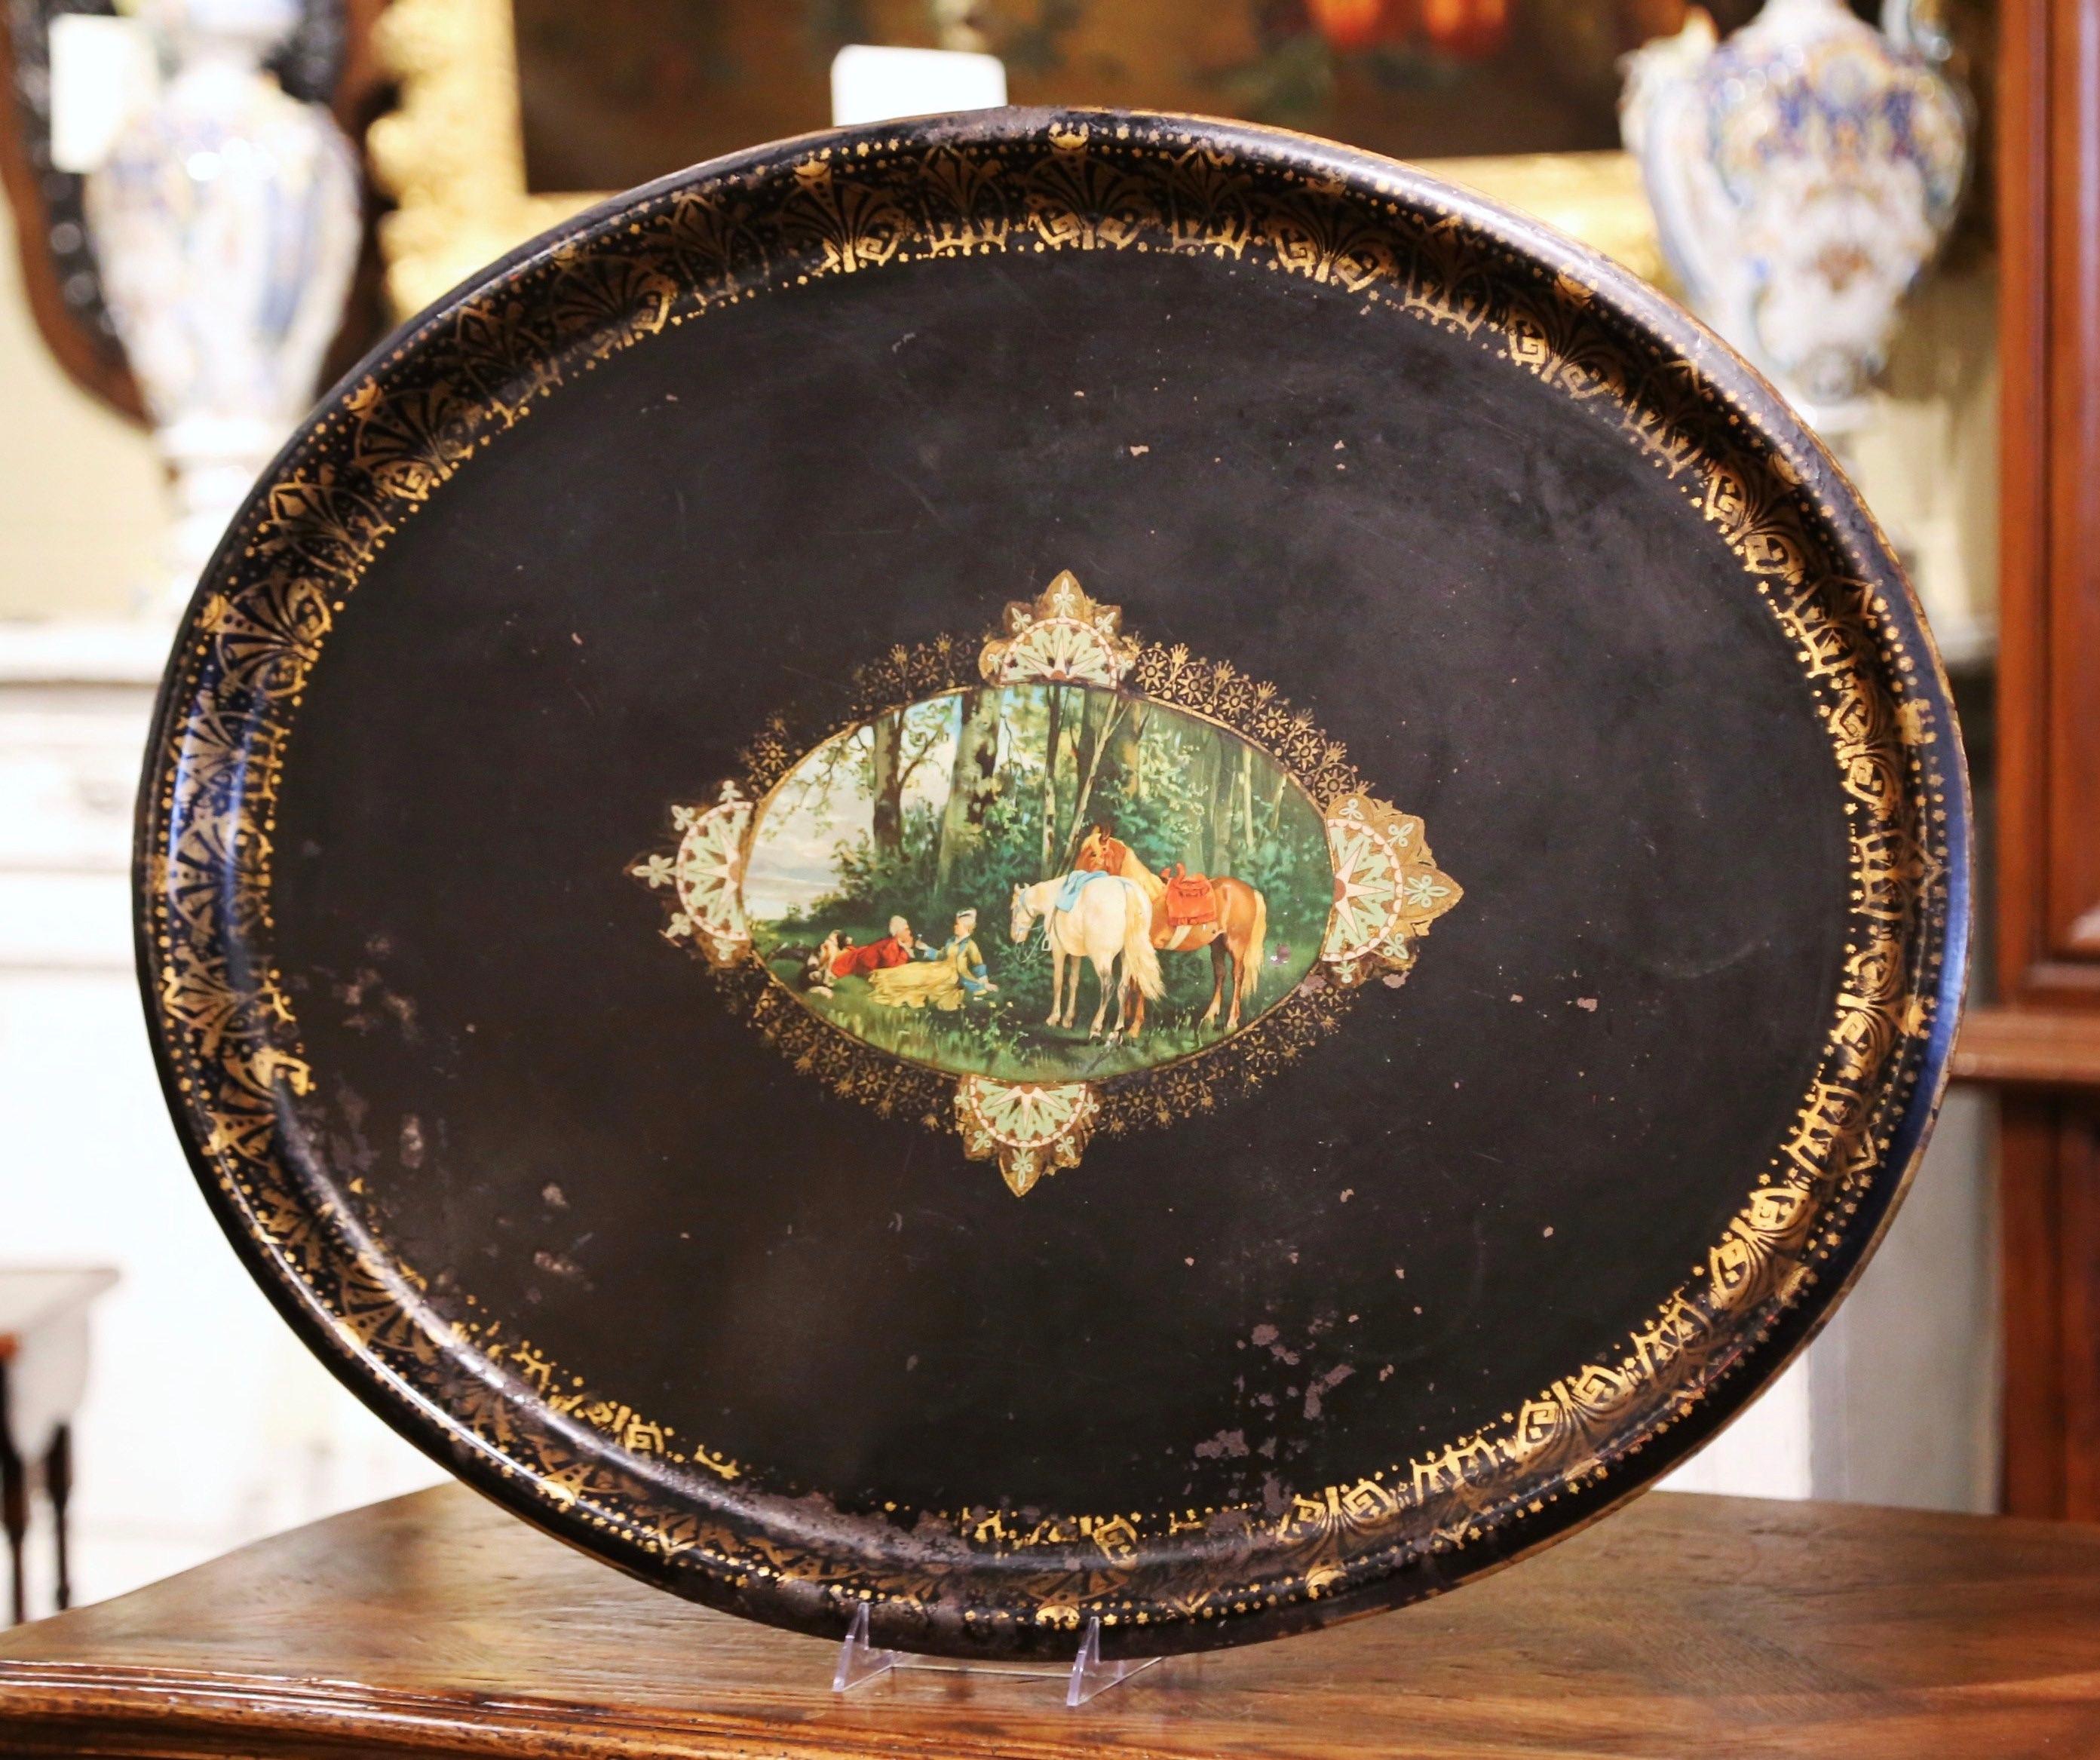 This elegant antique tray was created in France, circa 1870. Oval in shape, the large black tole platter is embellished by hand painted gilt decor around the lip, and a colorful hand painted center medallion depicting a romantic picnic in the park